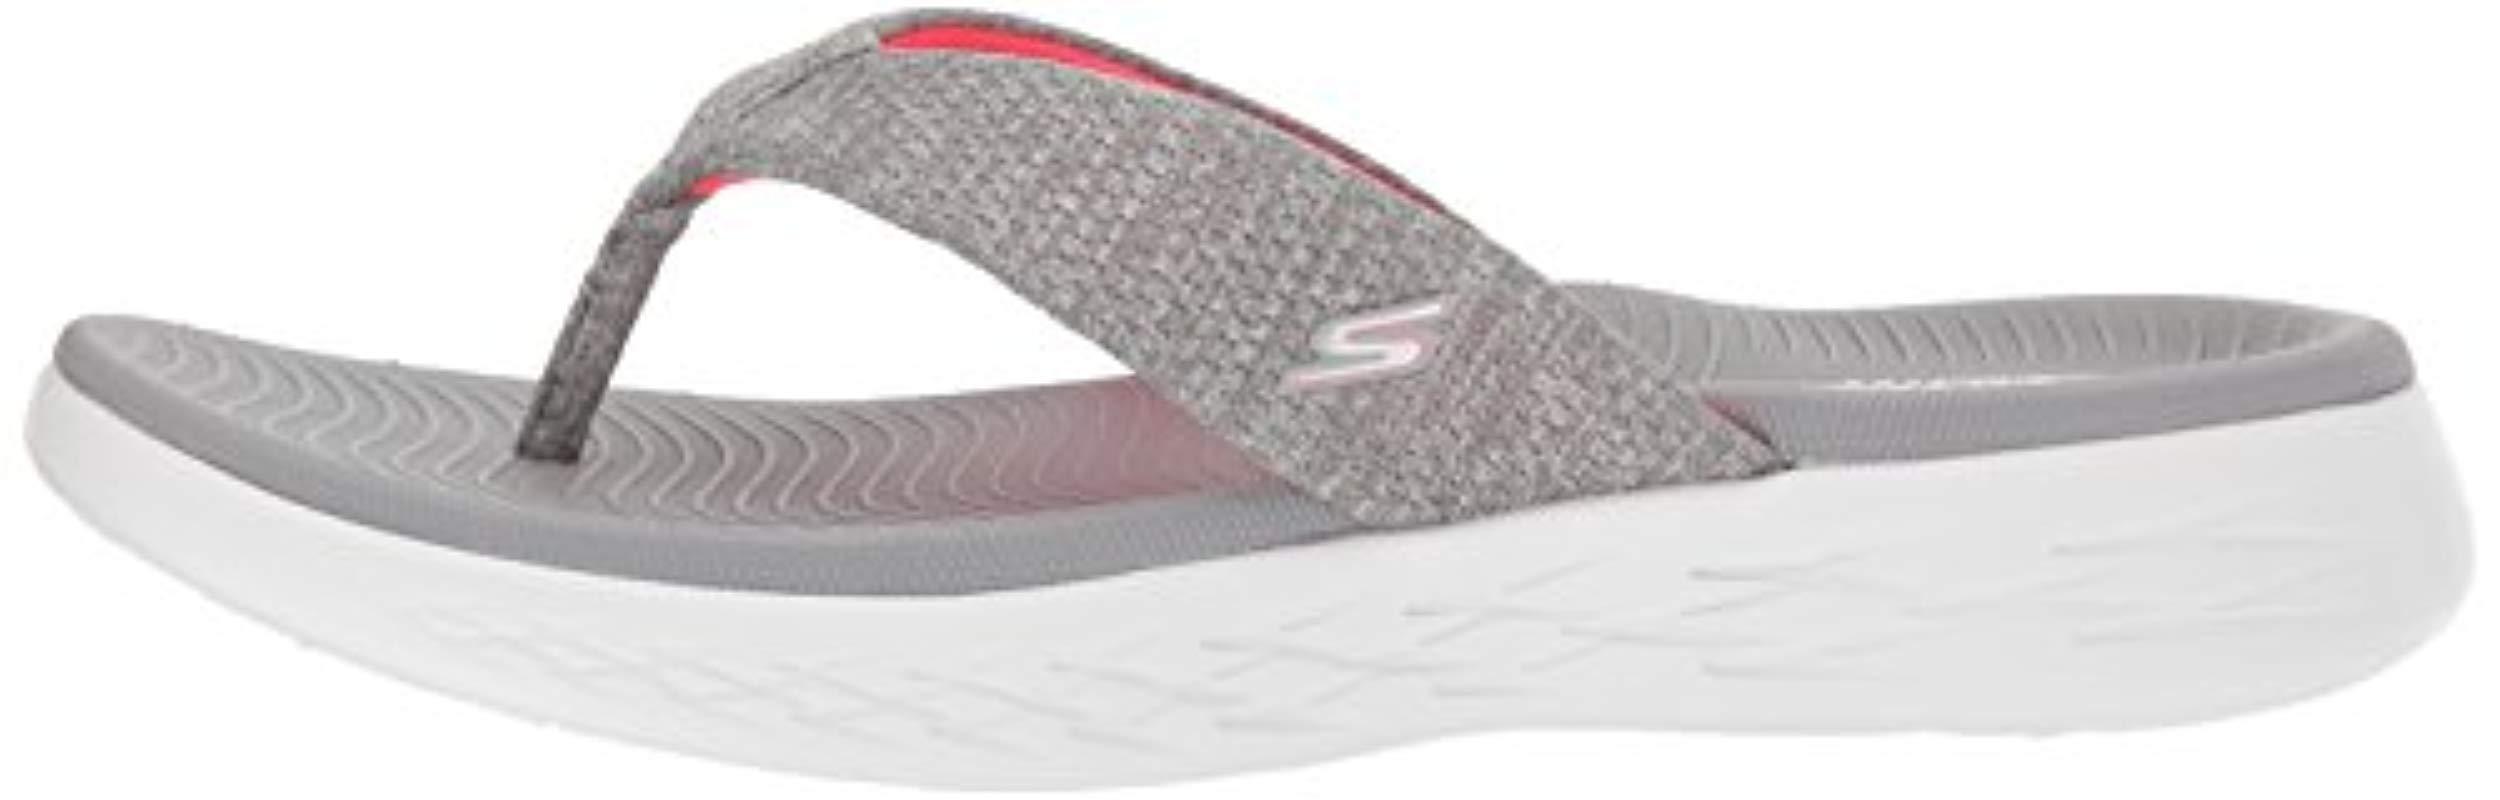 Skechers On-the-go 600-preferred Flip-flop in Gray/Pink (Gray) - Lyst